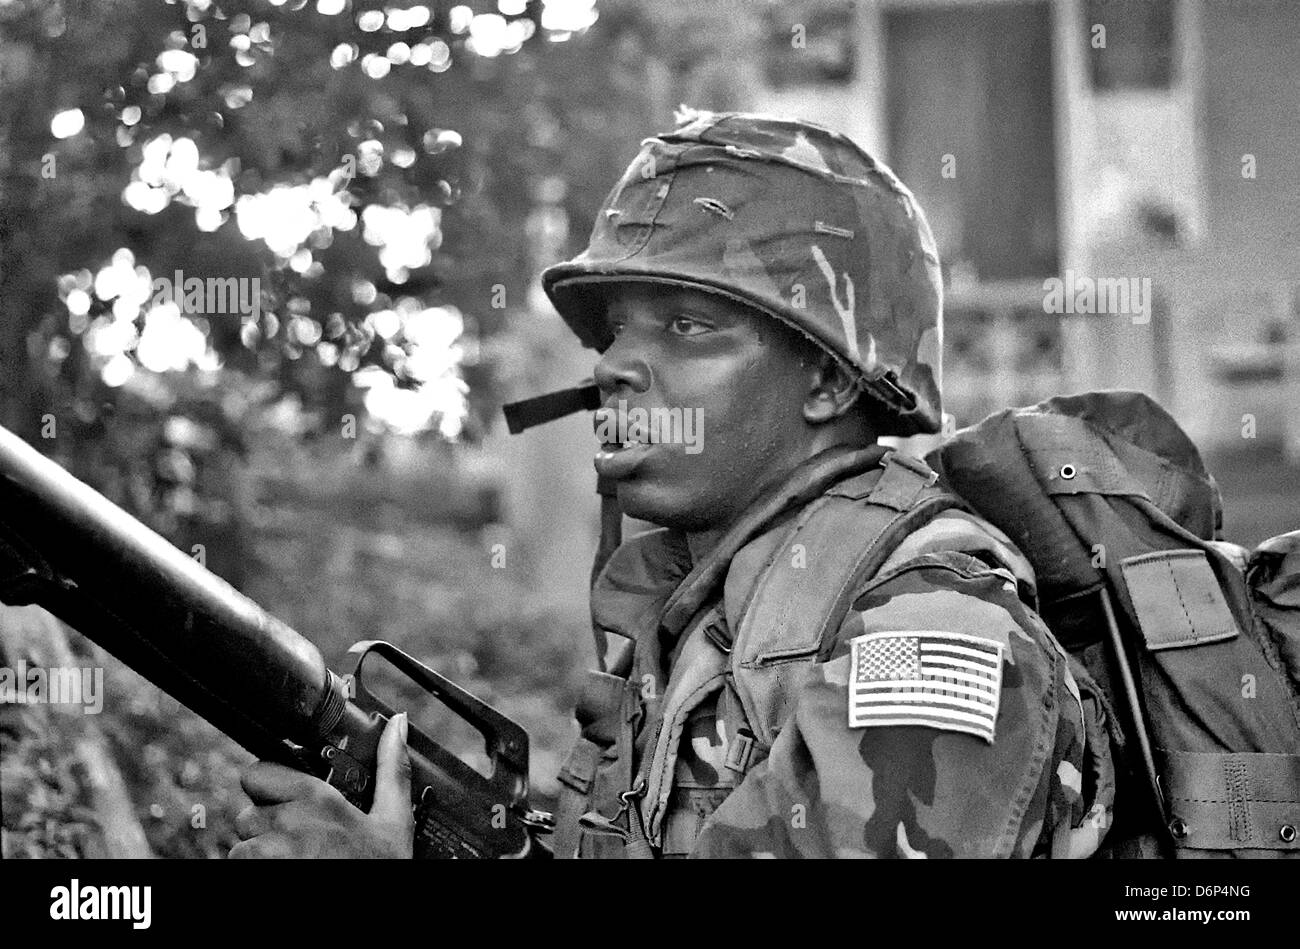 A US Marine armed with M16A1 rifle patrols the area around Grenville during the Invasion of Grenada, codenamed Operation Urgent Fury October 25, 1983 in Grenville, Grenada. The invasion began on October 25, 1983 and was the first major military action by the United States since the end of the Vietnam War. Stock Photo